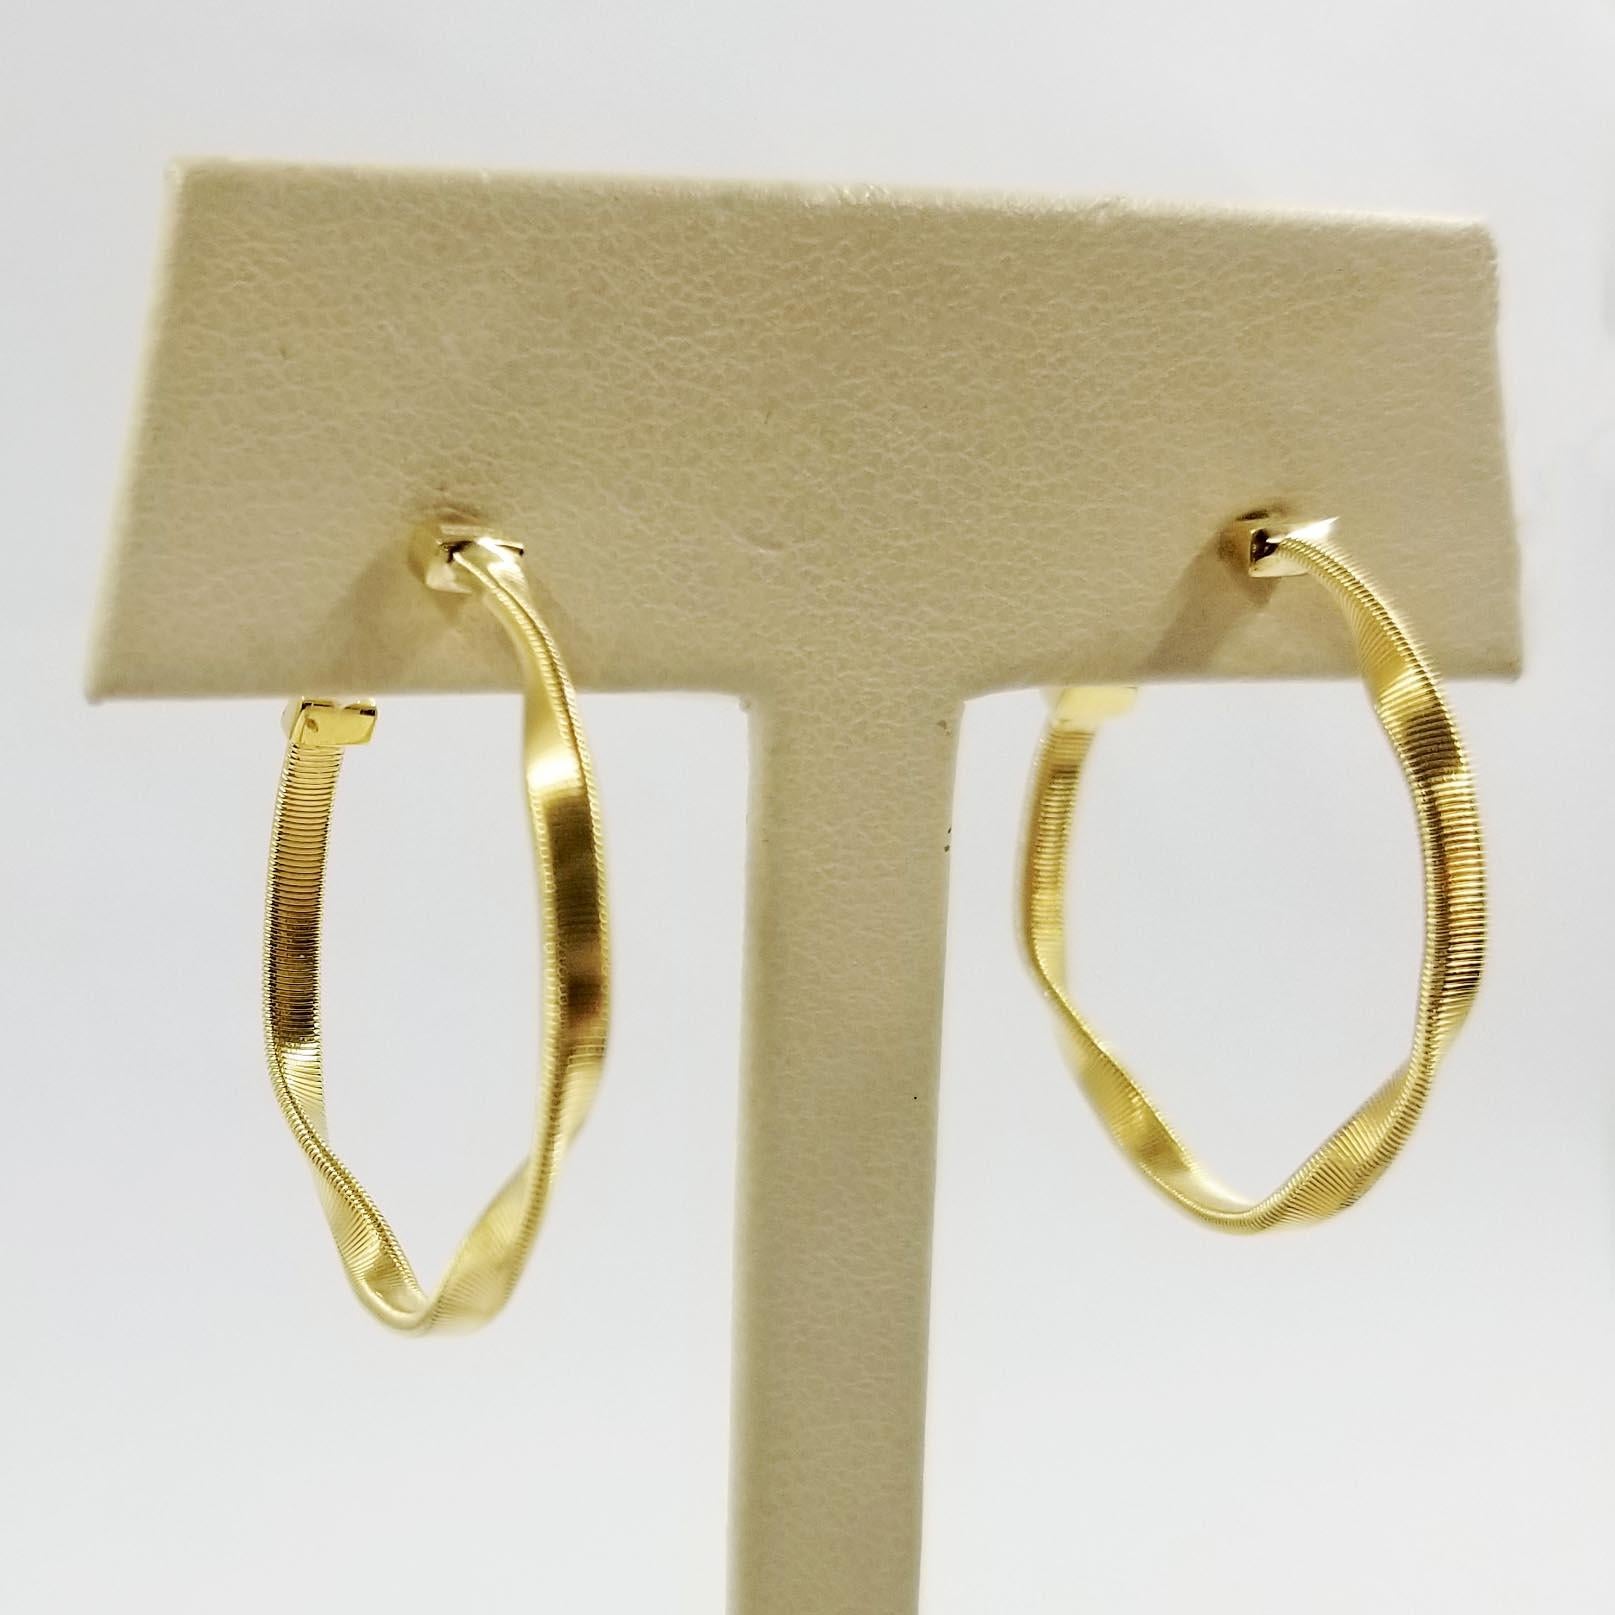 These twisted and textured hoop earrings are crafted in 18 karat yellow gold. The tops are signed Marco Bicego. The earrings feature a post and friction back closure. Diameter of hoop is approximately 1 inch. Finished weight is 5 grams. MSRP is